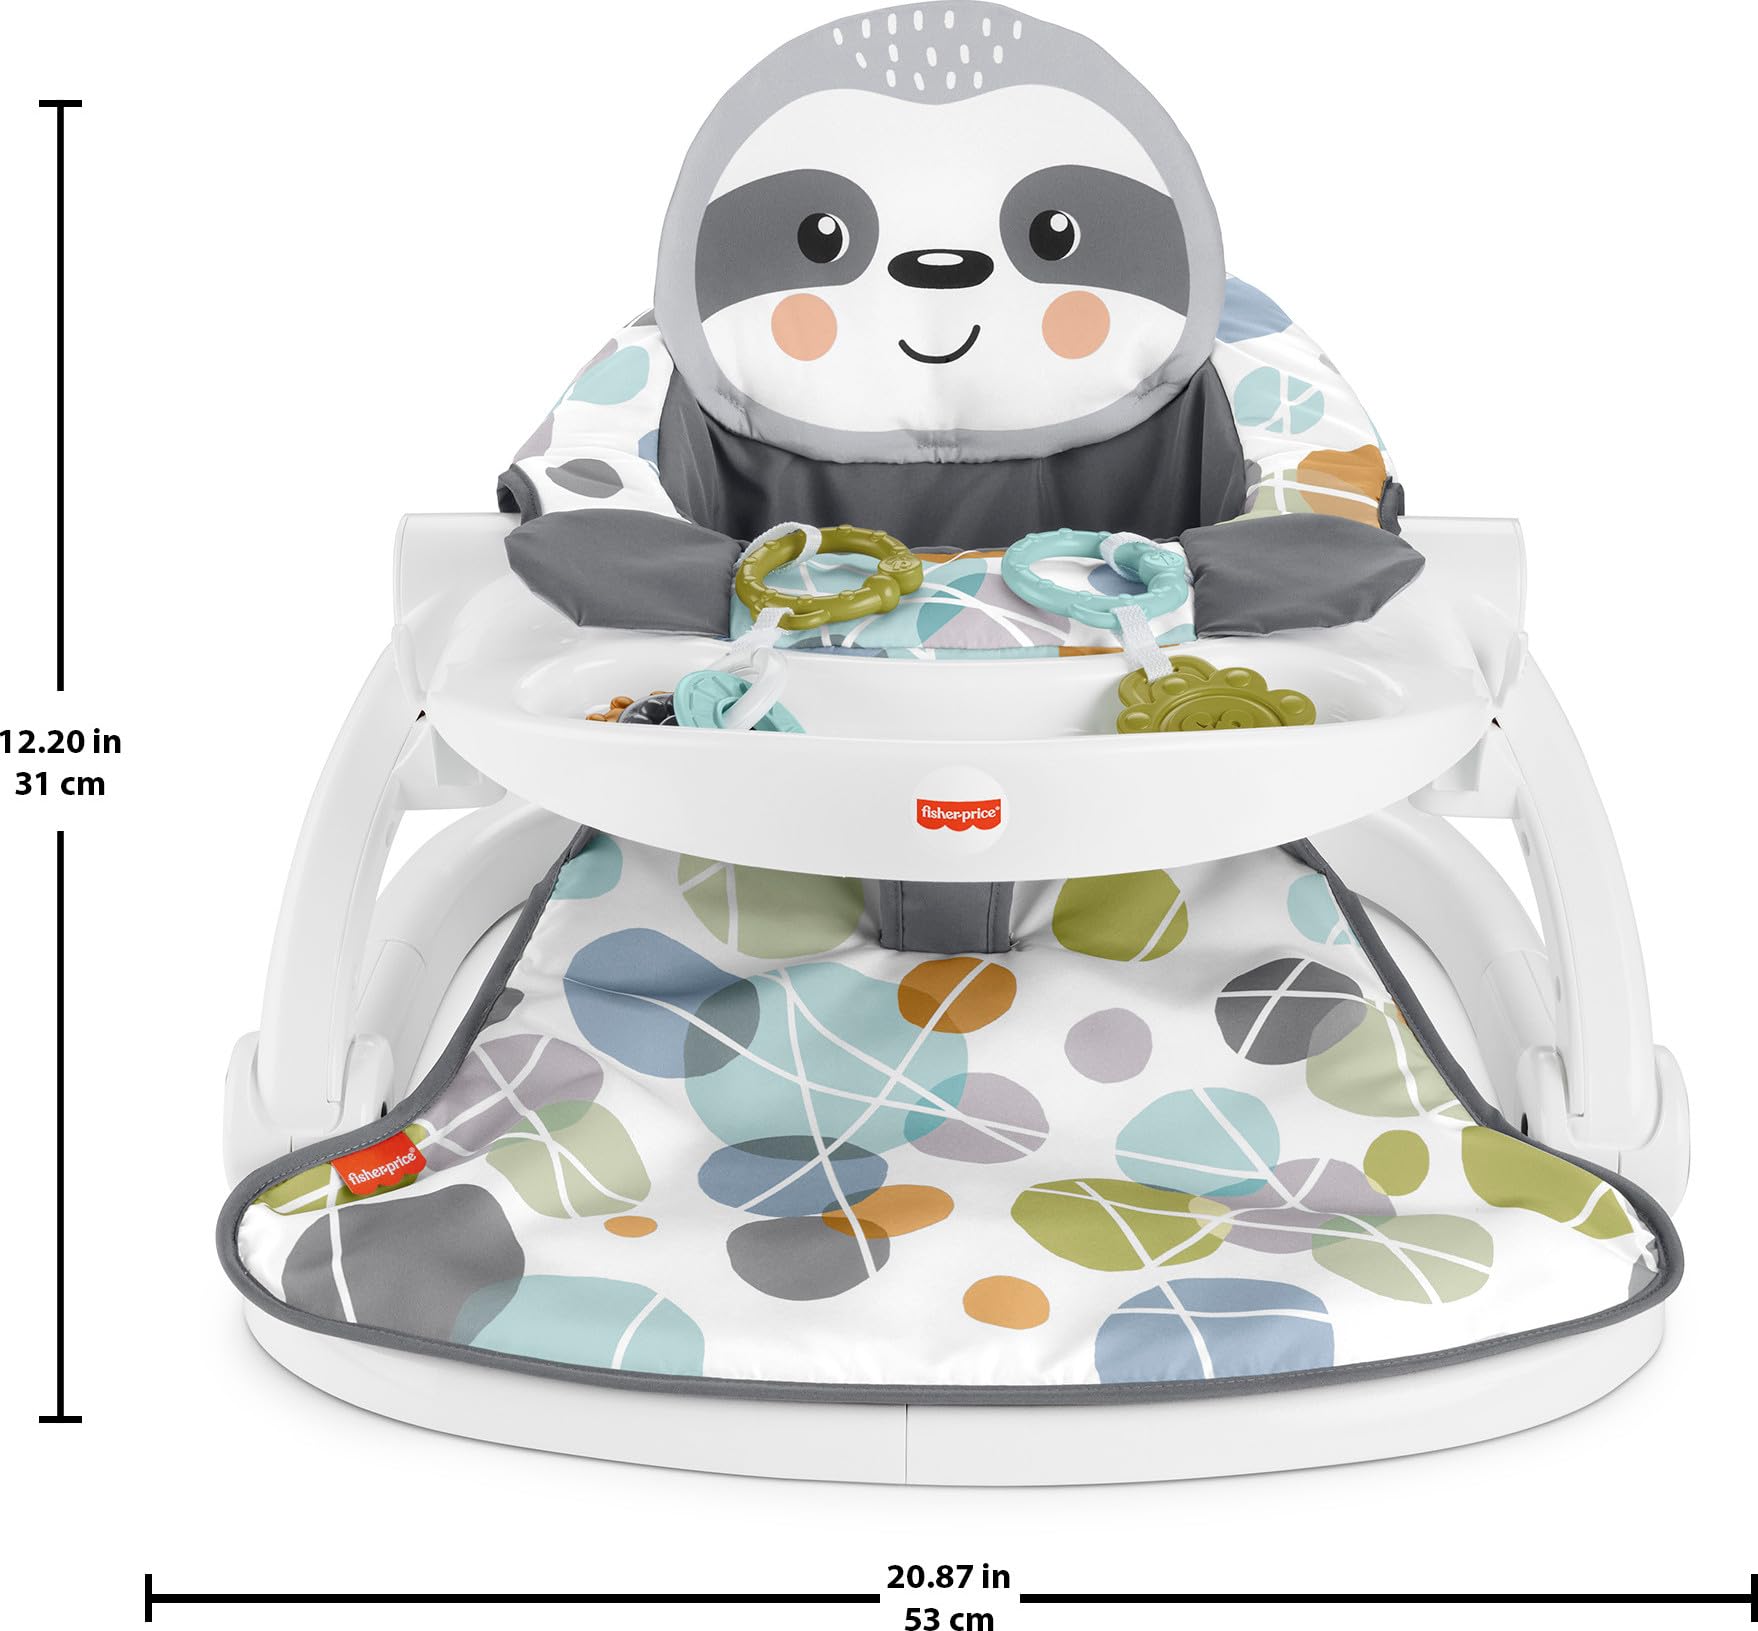 Fisher-Price Baby Portable Chair with Snack Tray, Sit Me Up Floor Seat with Linkable Clacker & Teether Toys, Cute Sloth